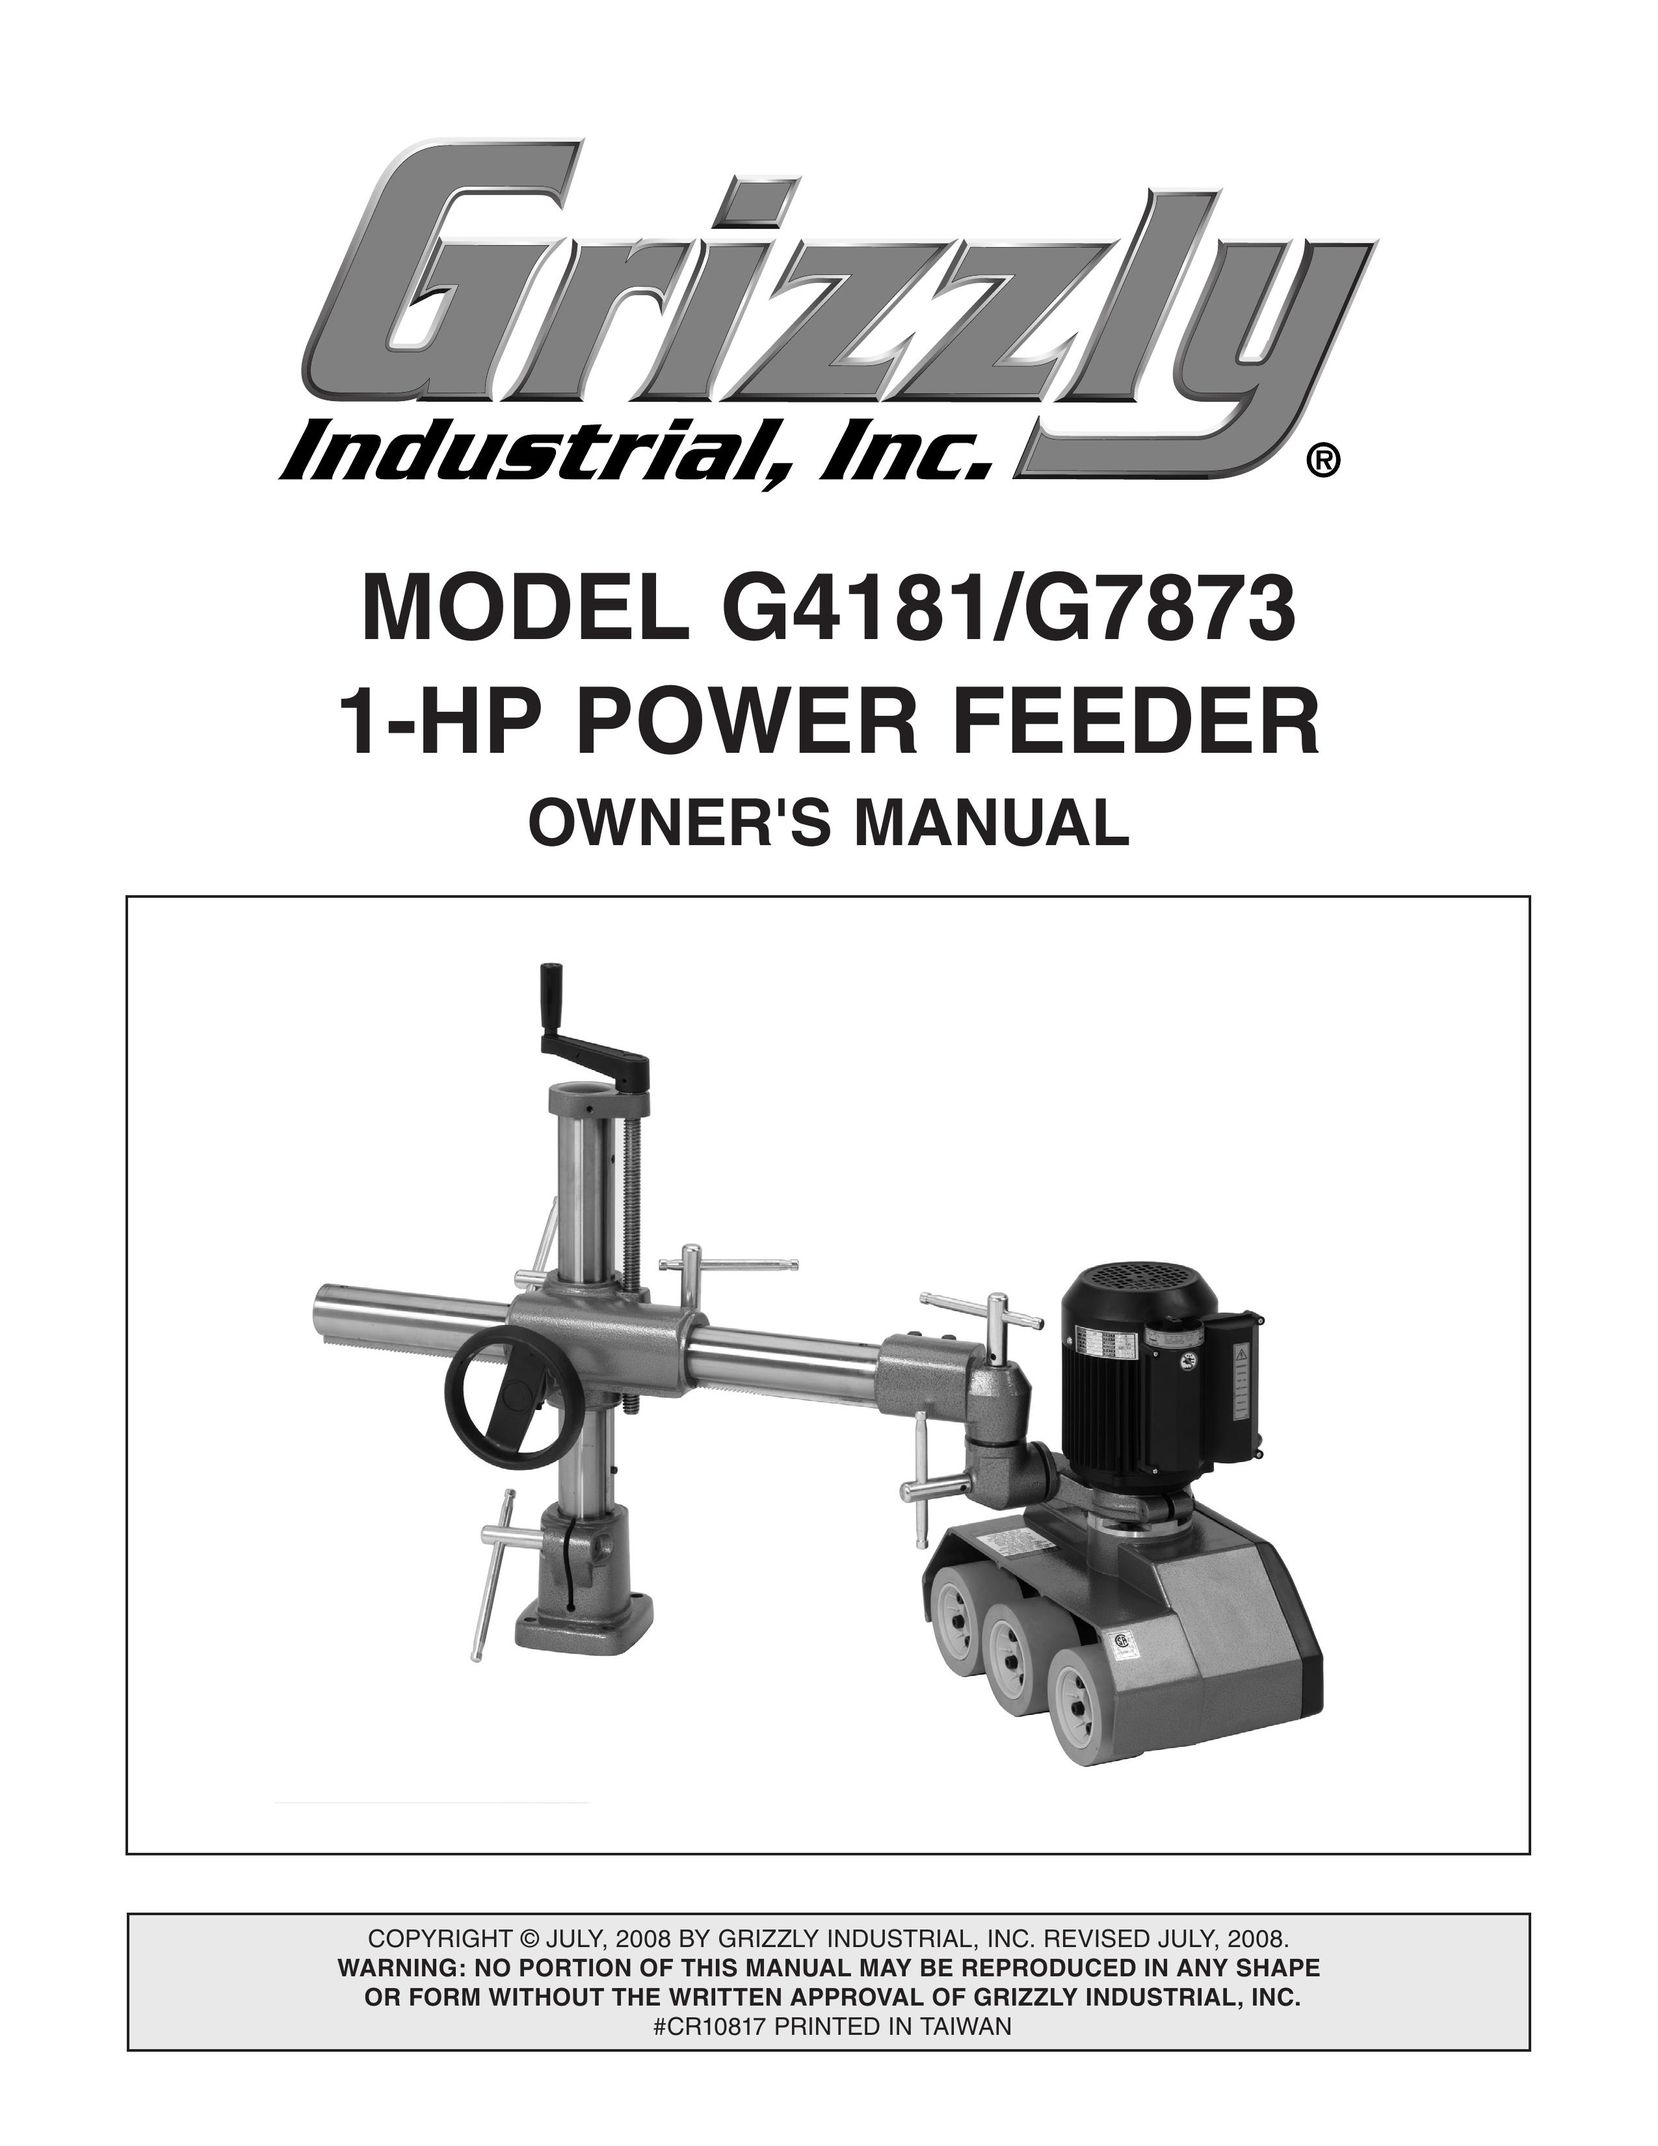 Grizzly G7873 Welder User Manual